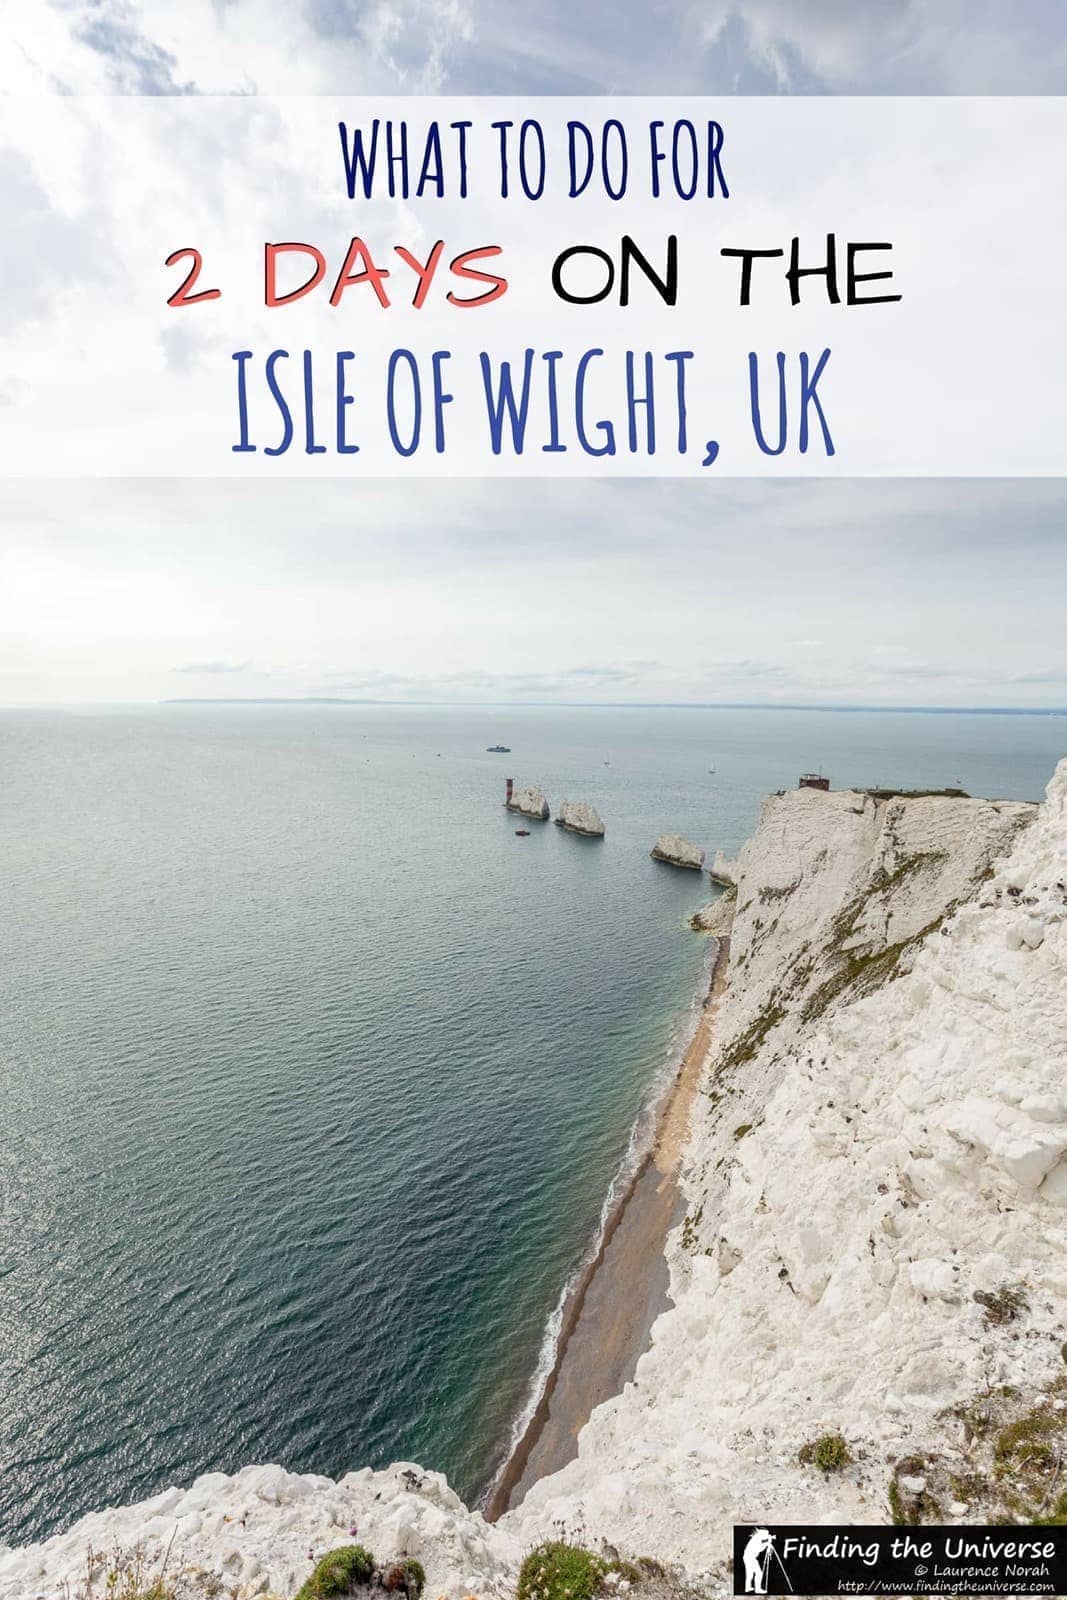 A 2 Day Isle Of Wight Itinerary covering some of the main attractions on the island as well as ideas for where to stay, how to get around and where to eat!